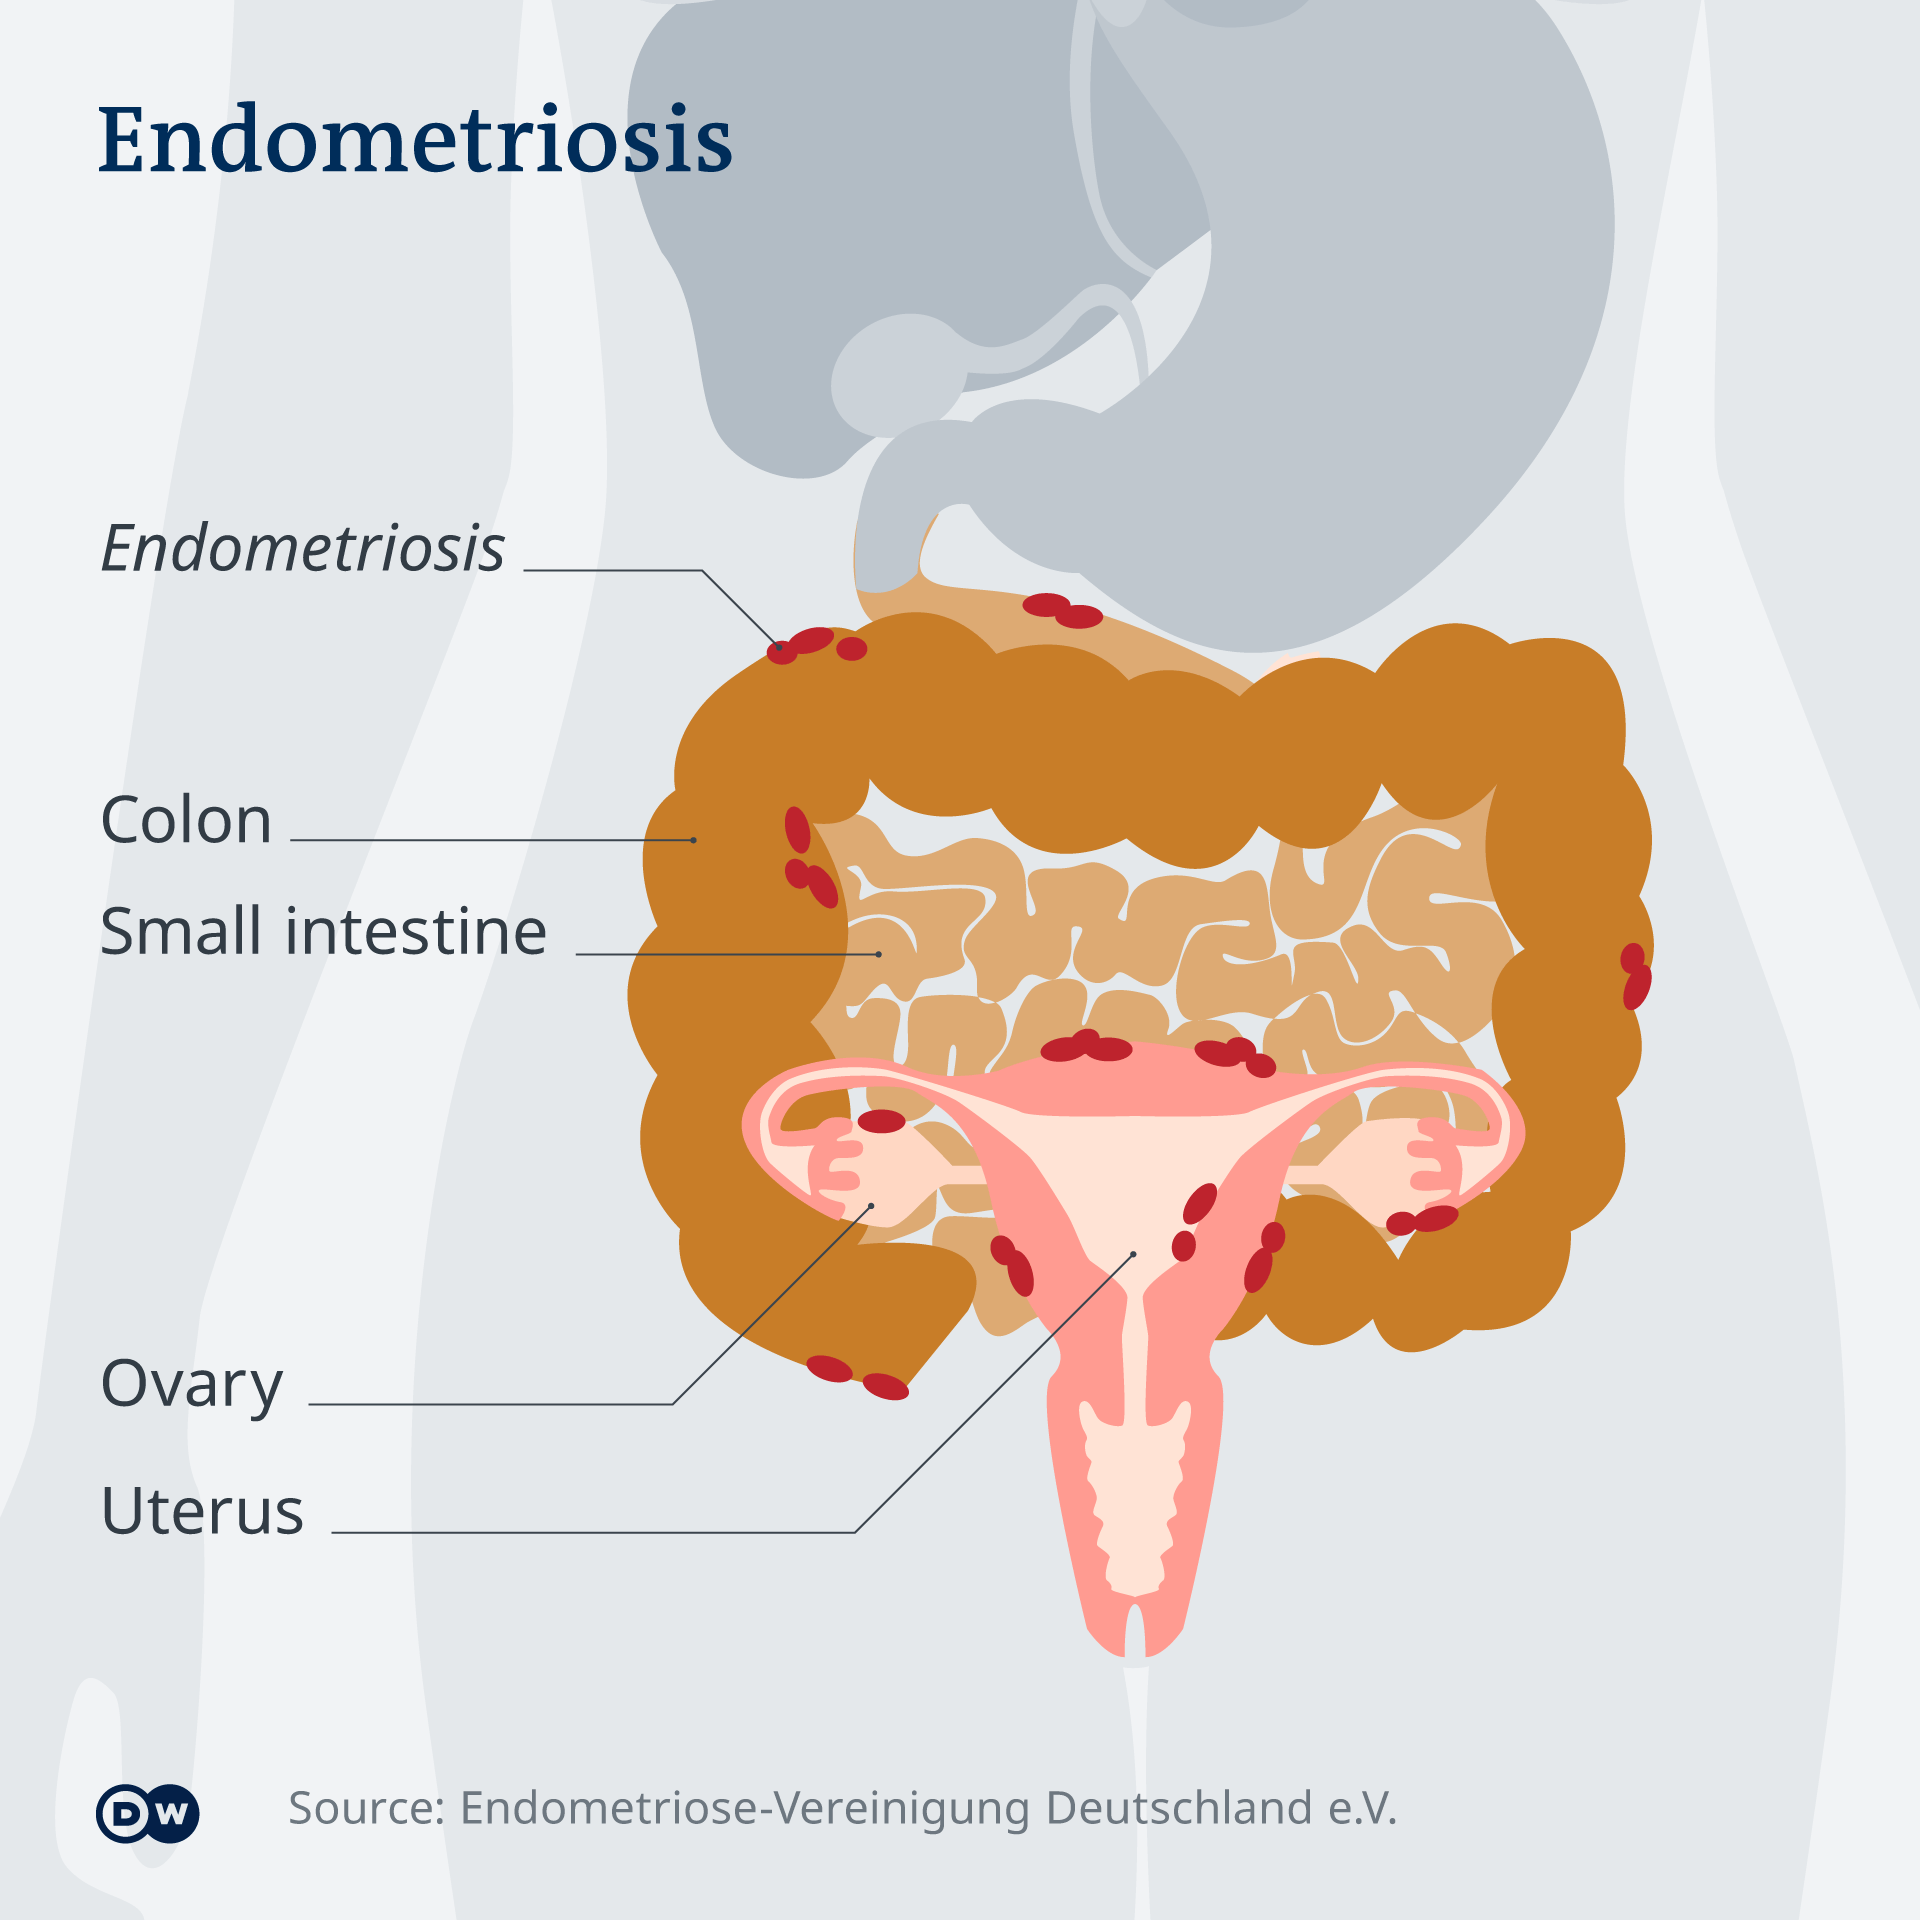 An infographic showing how endometriosis presents in a female's colon, small intestine, ovaries and uterus